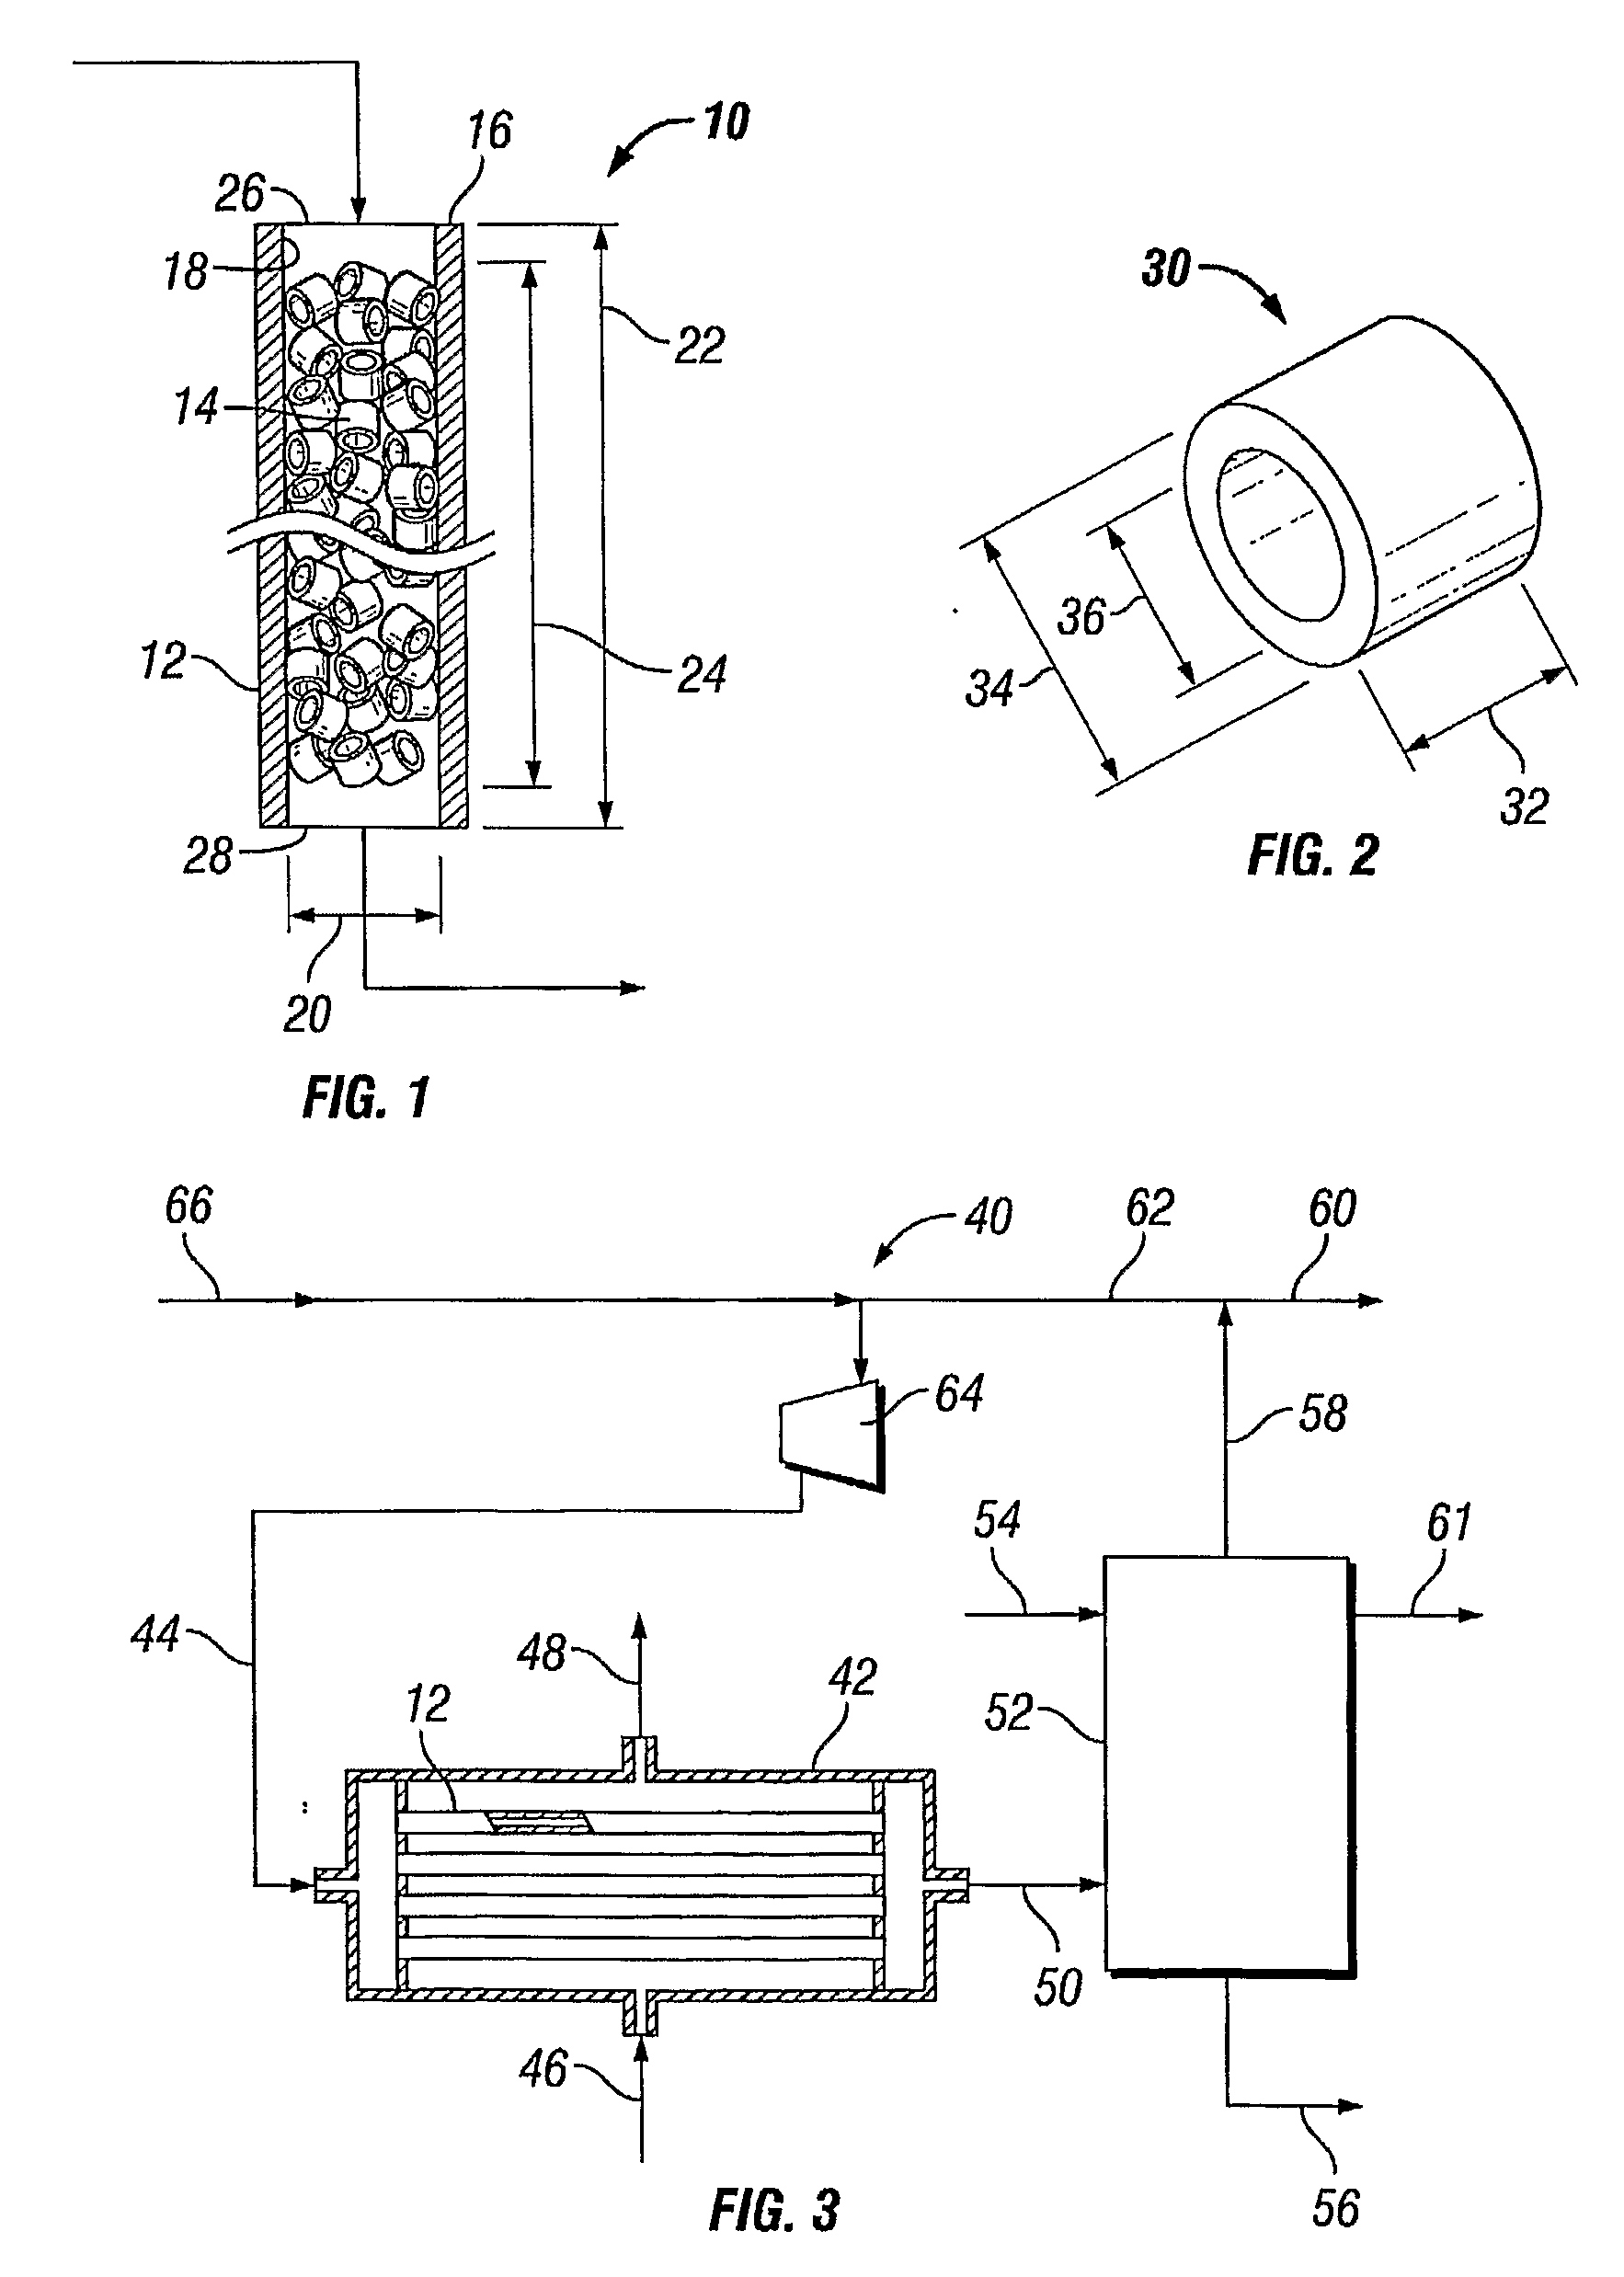 Reactor System and Process for the Manufacture of Ethylene Oxide